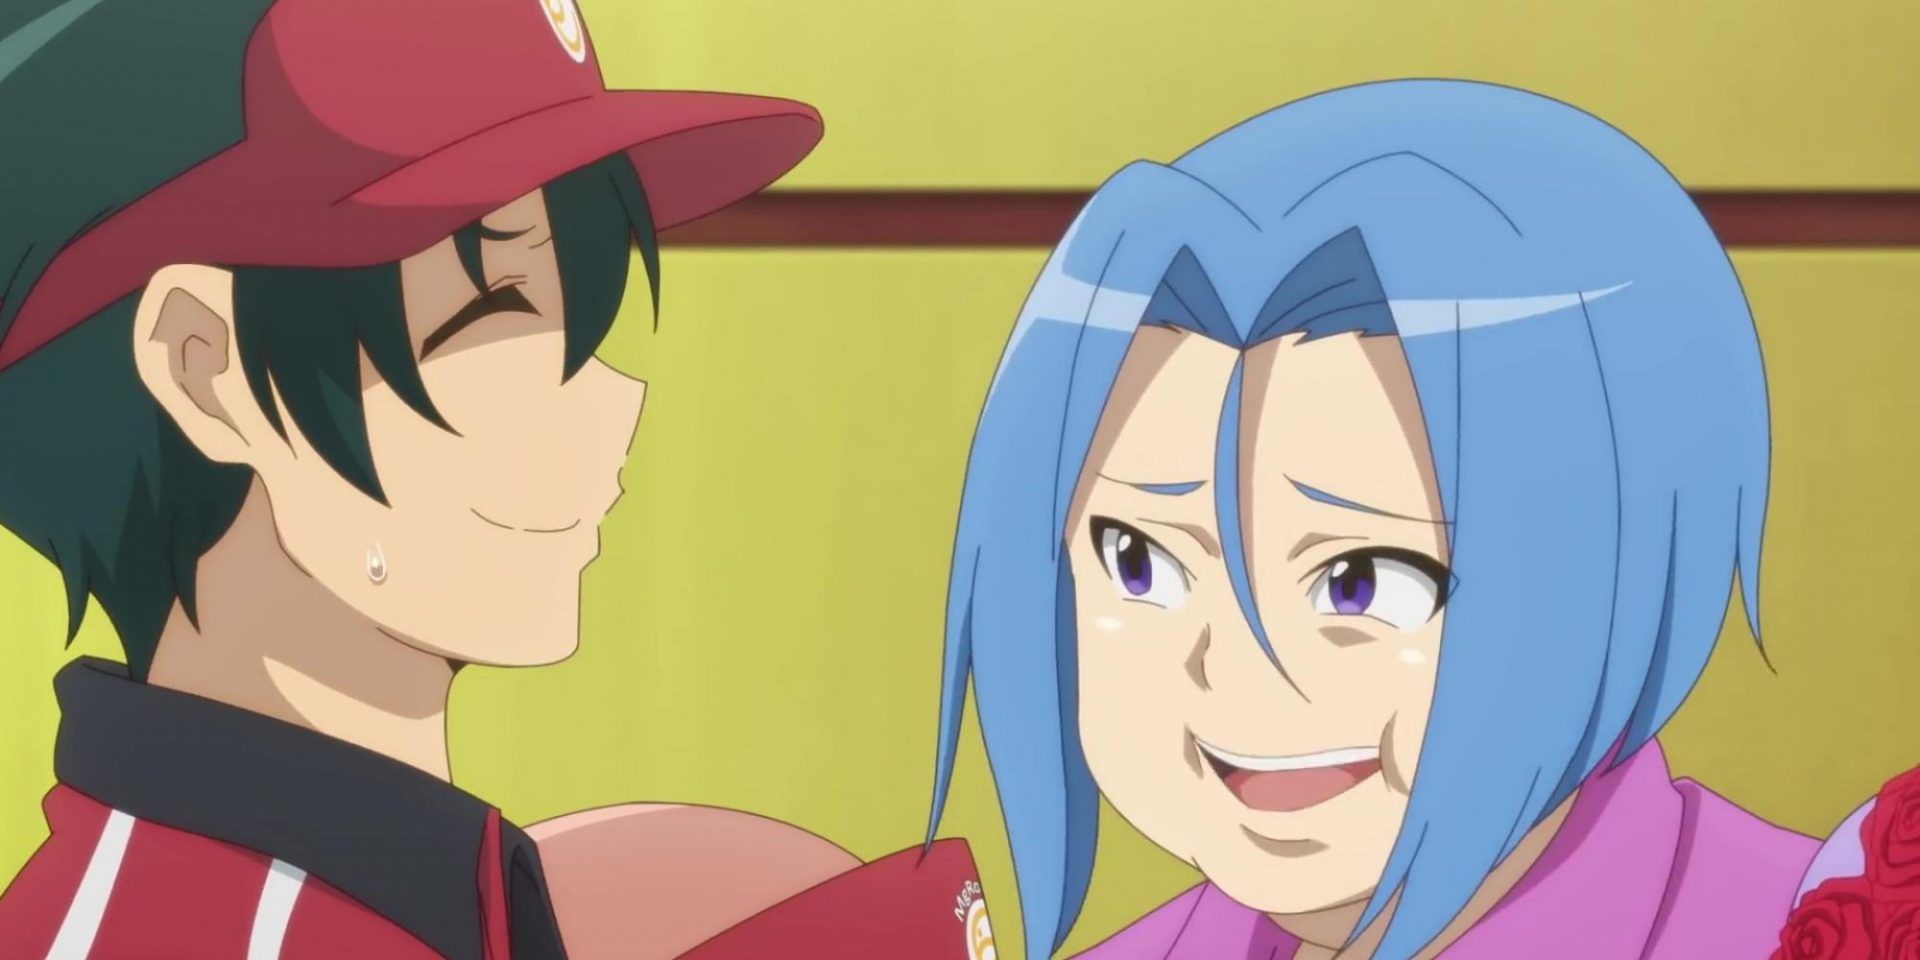 The Devil is a Part-Timer! 2 Episode 6 - To The Birds 